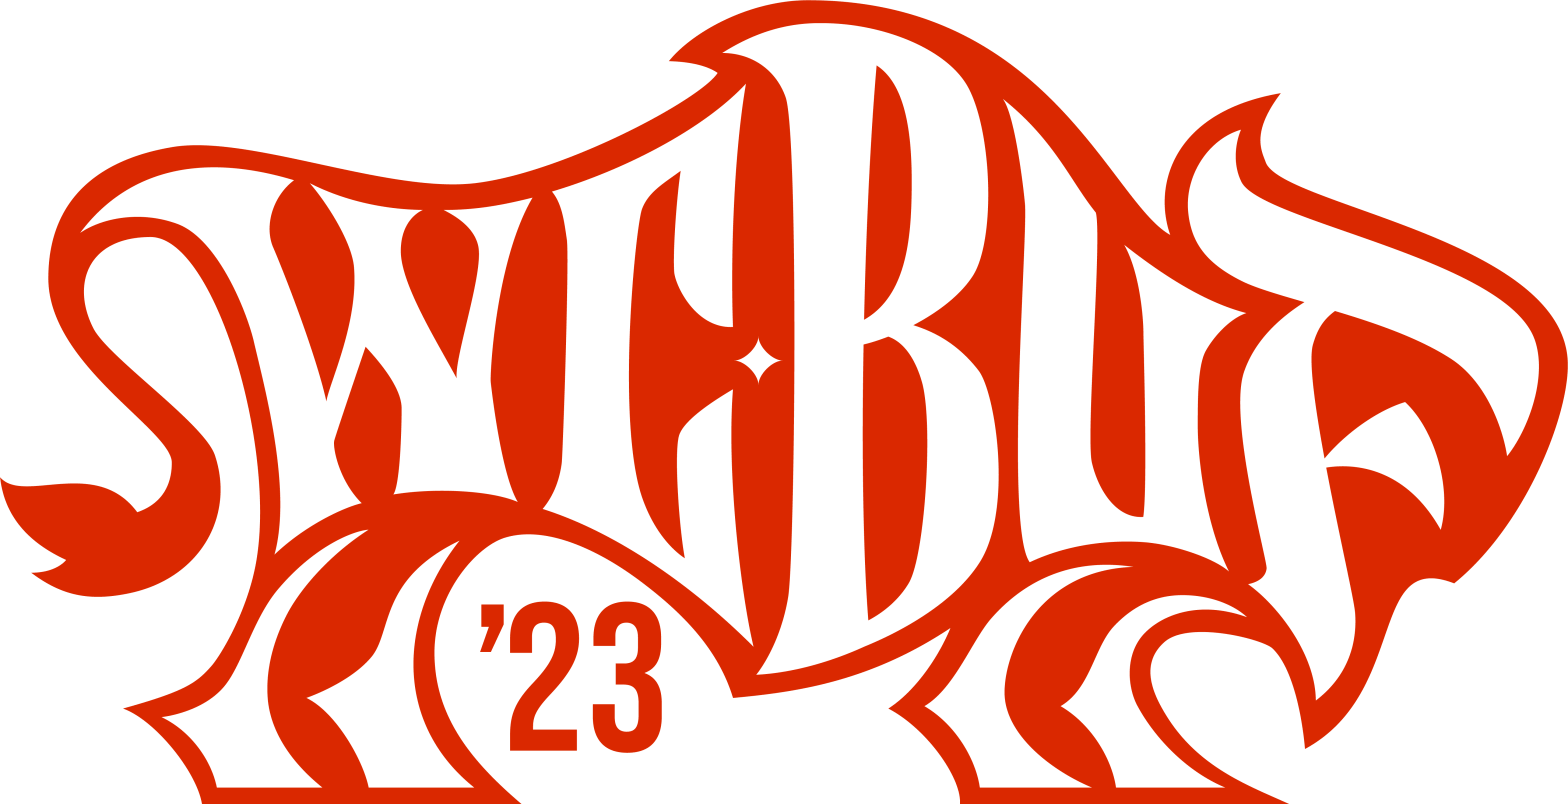 The text WCBUF stylized into the shape of a bison, with 23 under its legs.